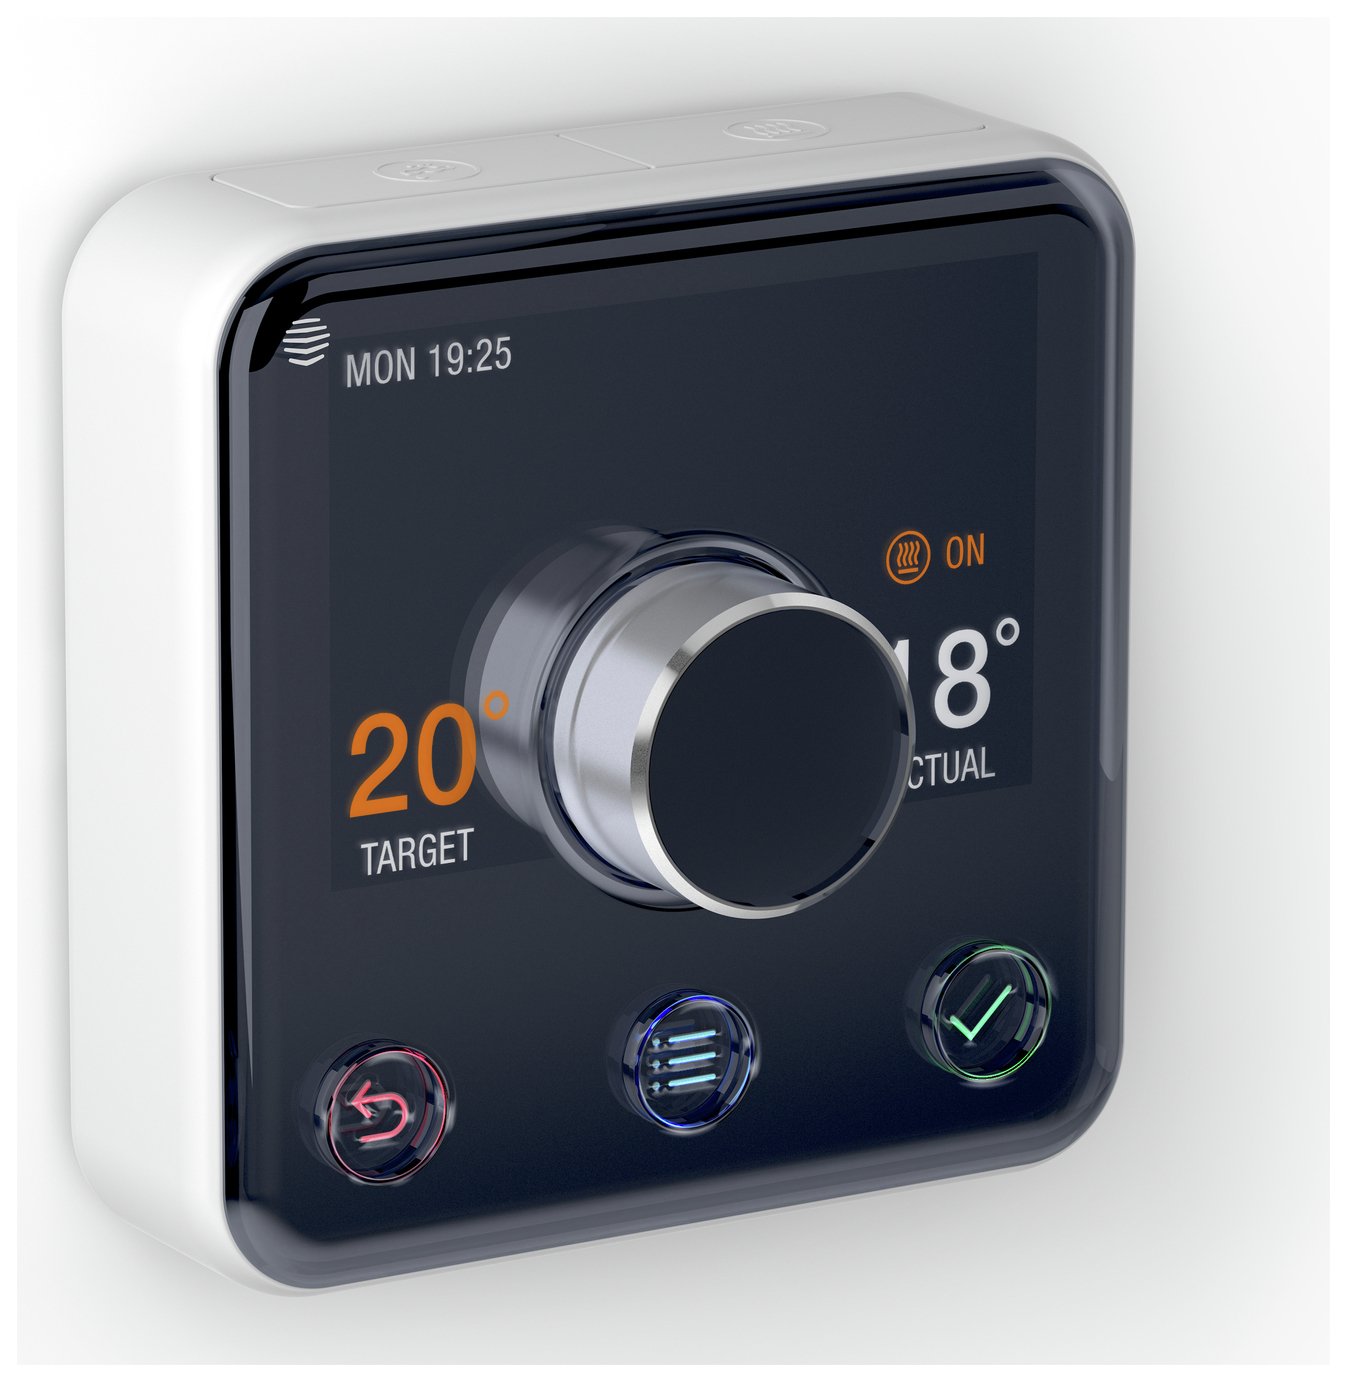 Hive Active Heating & Hot Water Thermostat Kit Review